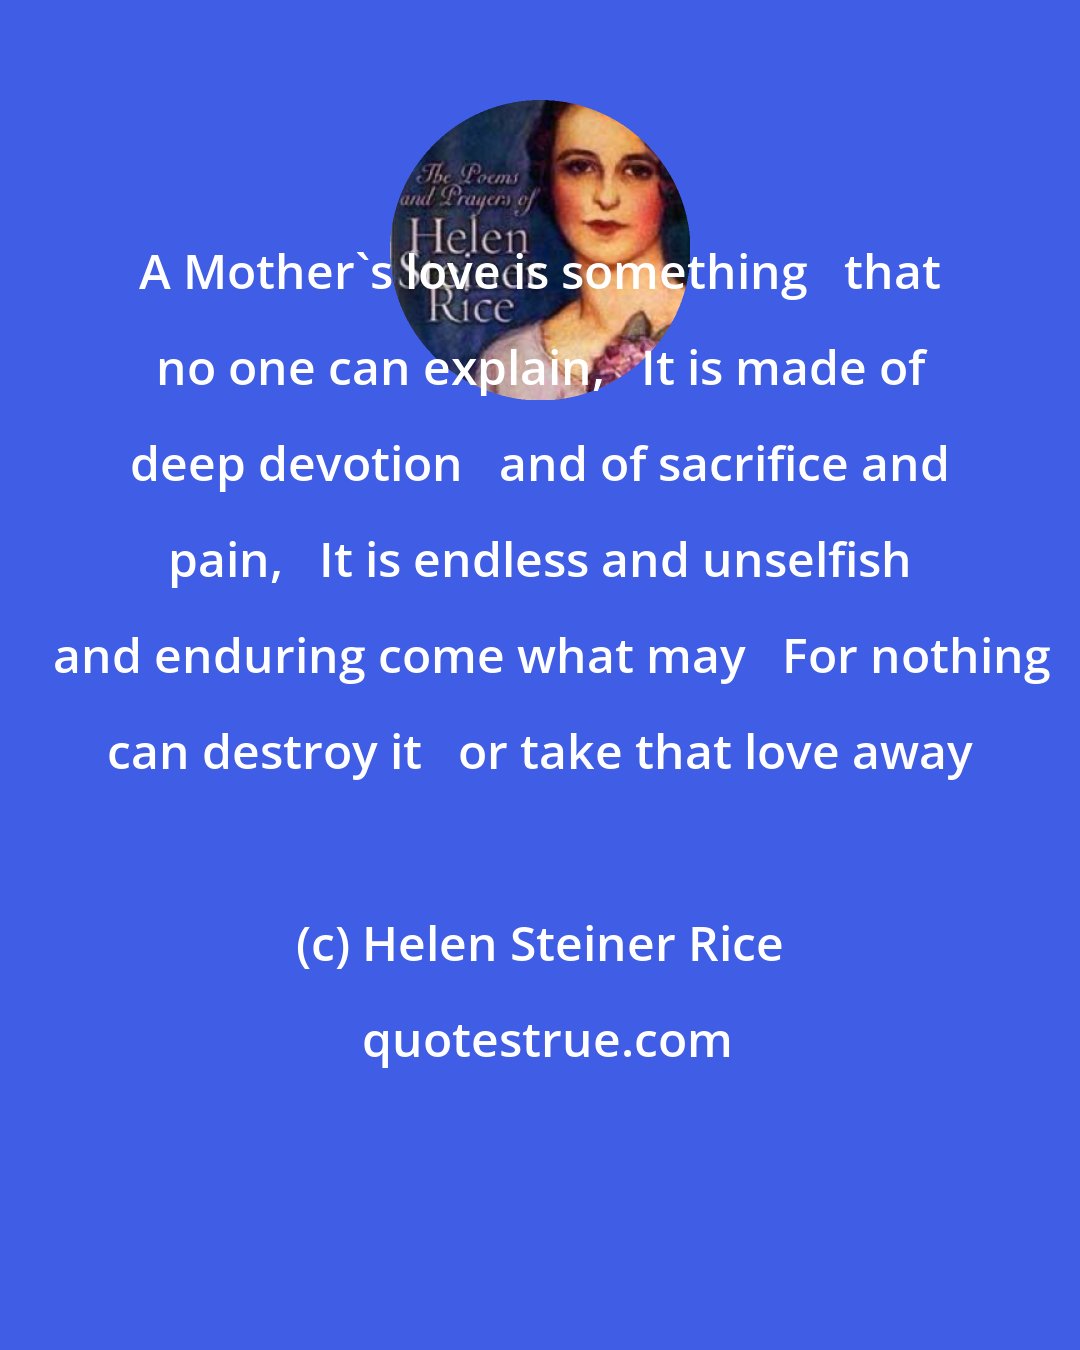 Helen Steiner Rice: A Mother's love is something   that no one can explain,   It is made of deep devotion   and of sacrifice and pain,   It is endless and unselfish   and enduring come what may   For nothing can destroy it   or take that love away